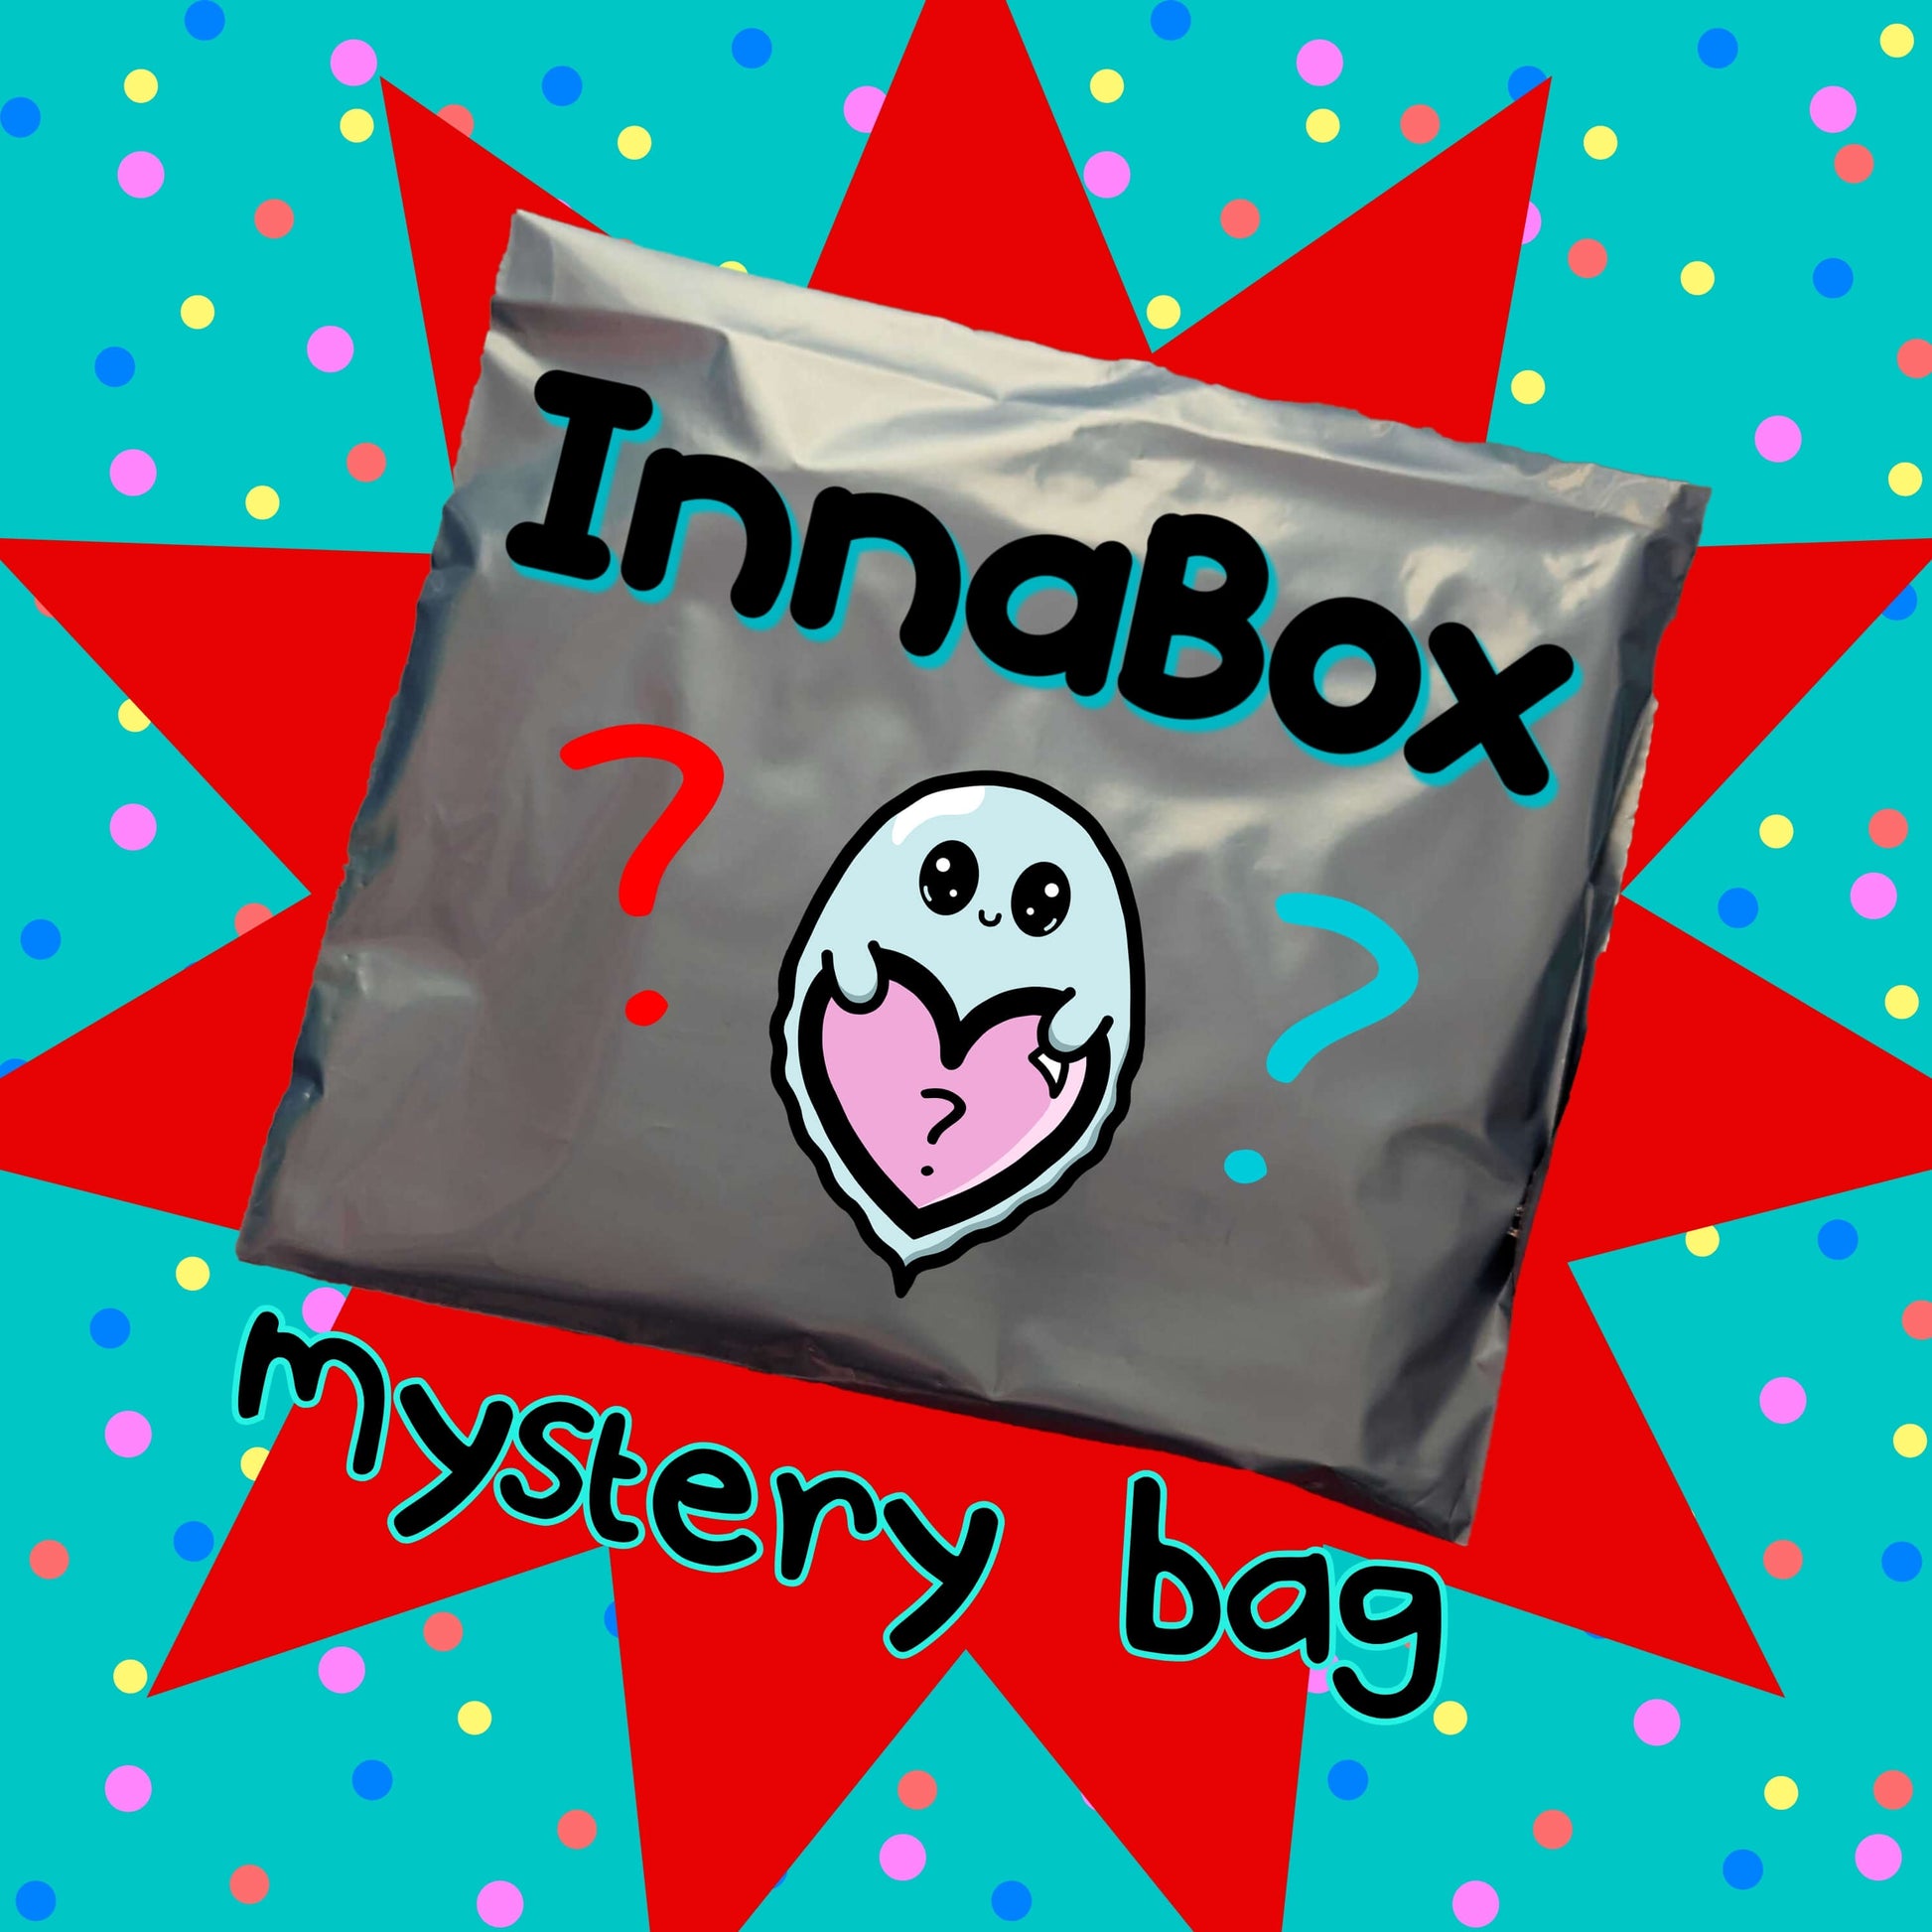 The Mystery Bag from Innabox featuring £30 worth of goodies for £15. The graphic features a silver parcel with the innabox logo and smiling ghost logo on a red starburst on top of a blue background with rainbow polka dots and bottom black text reading 'mystery bag'.